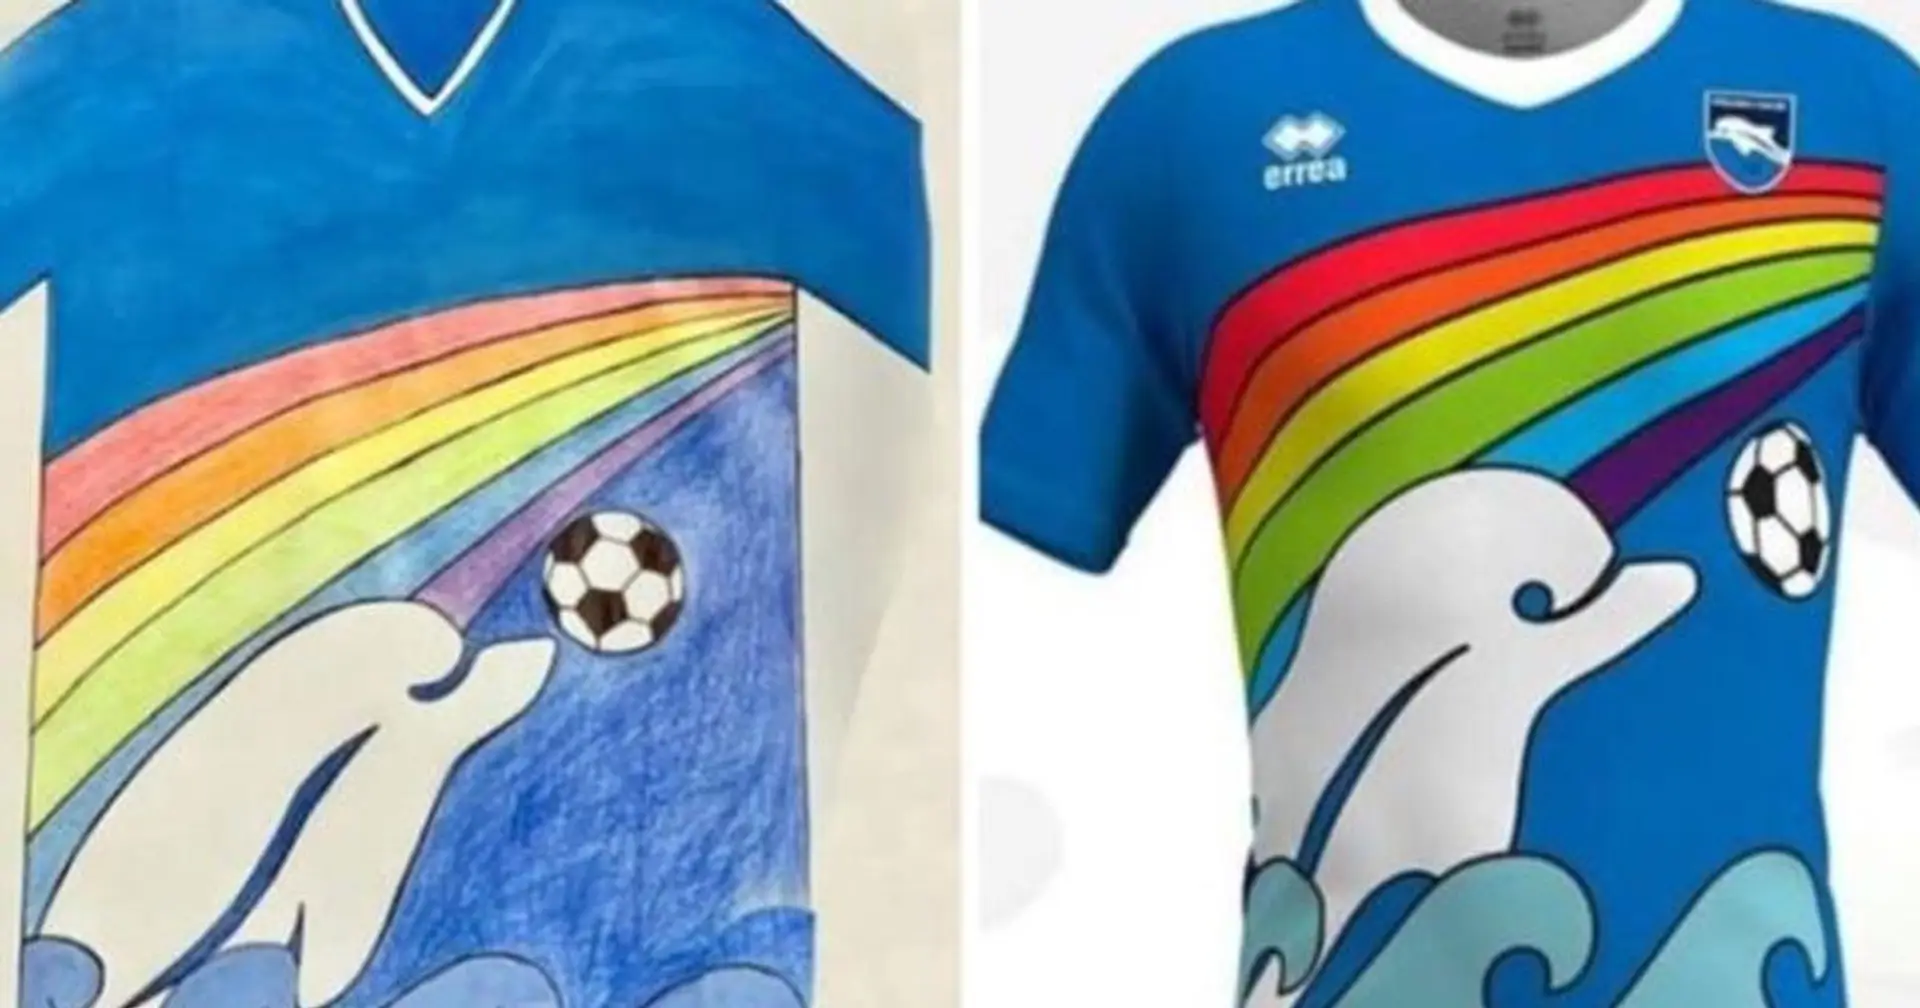 Serie B side Pescara adopt 6-year-old fan's kit design for next season after running 'give a kick to COVID-19' competition